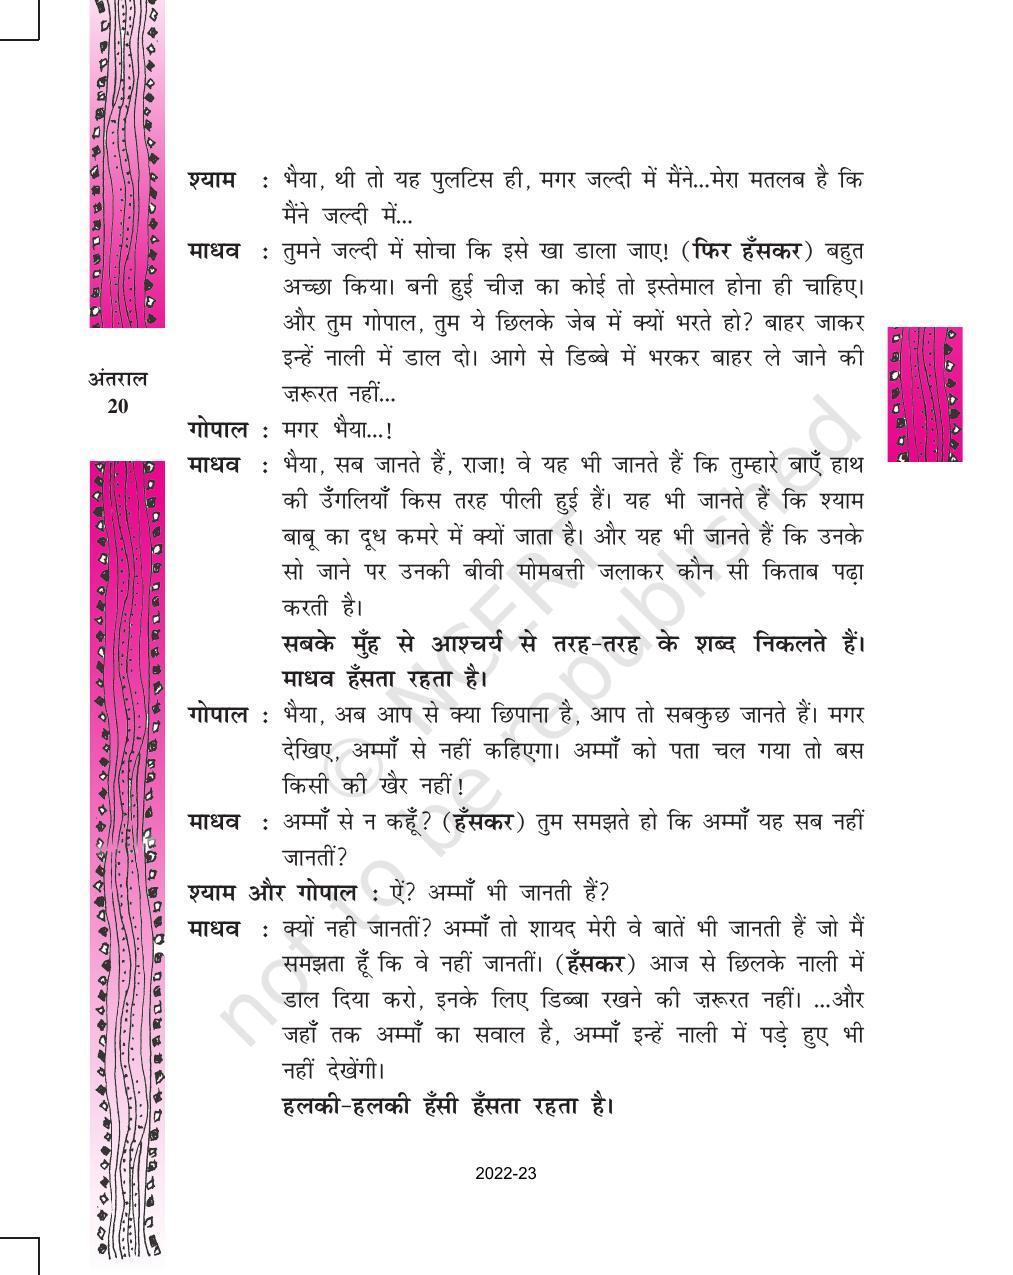 NCERT Book for Class 11 Hindi Antral Chapter 1 अंडे के छिलके - Page 20